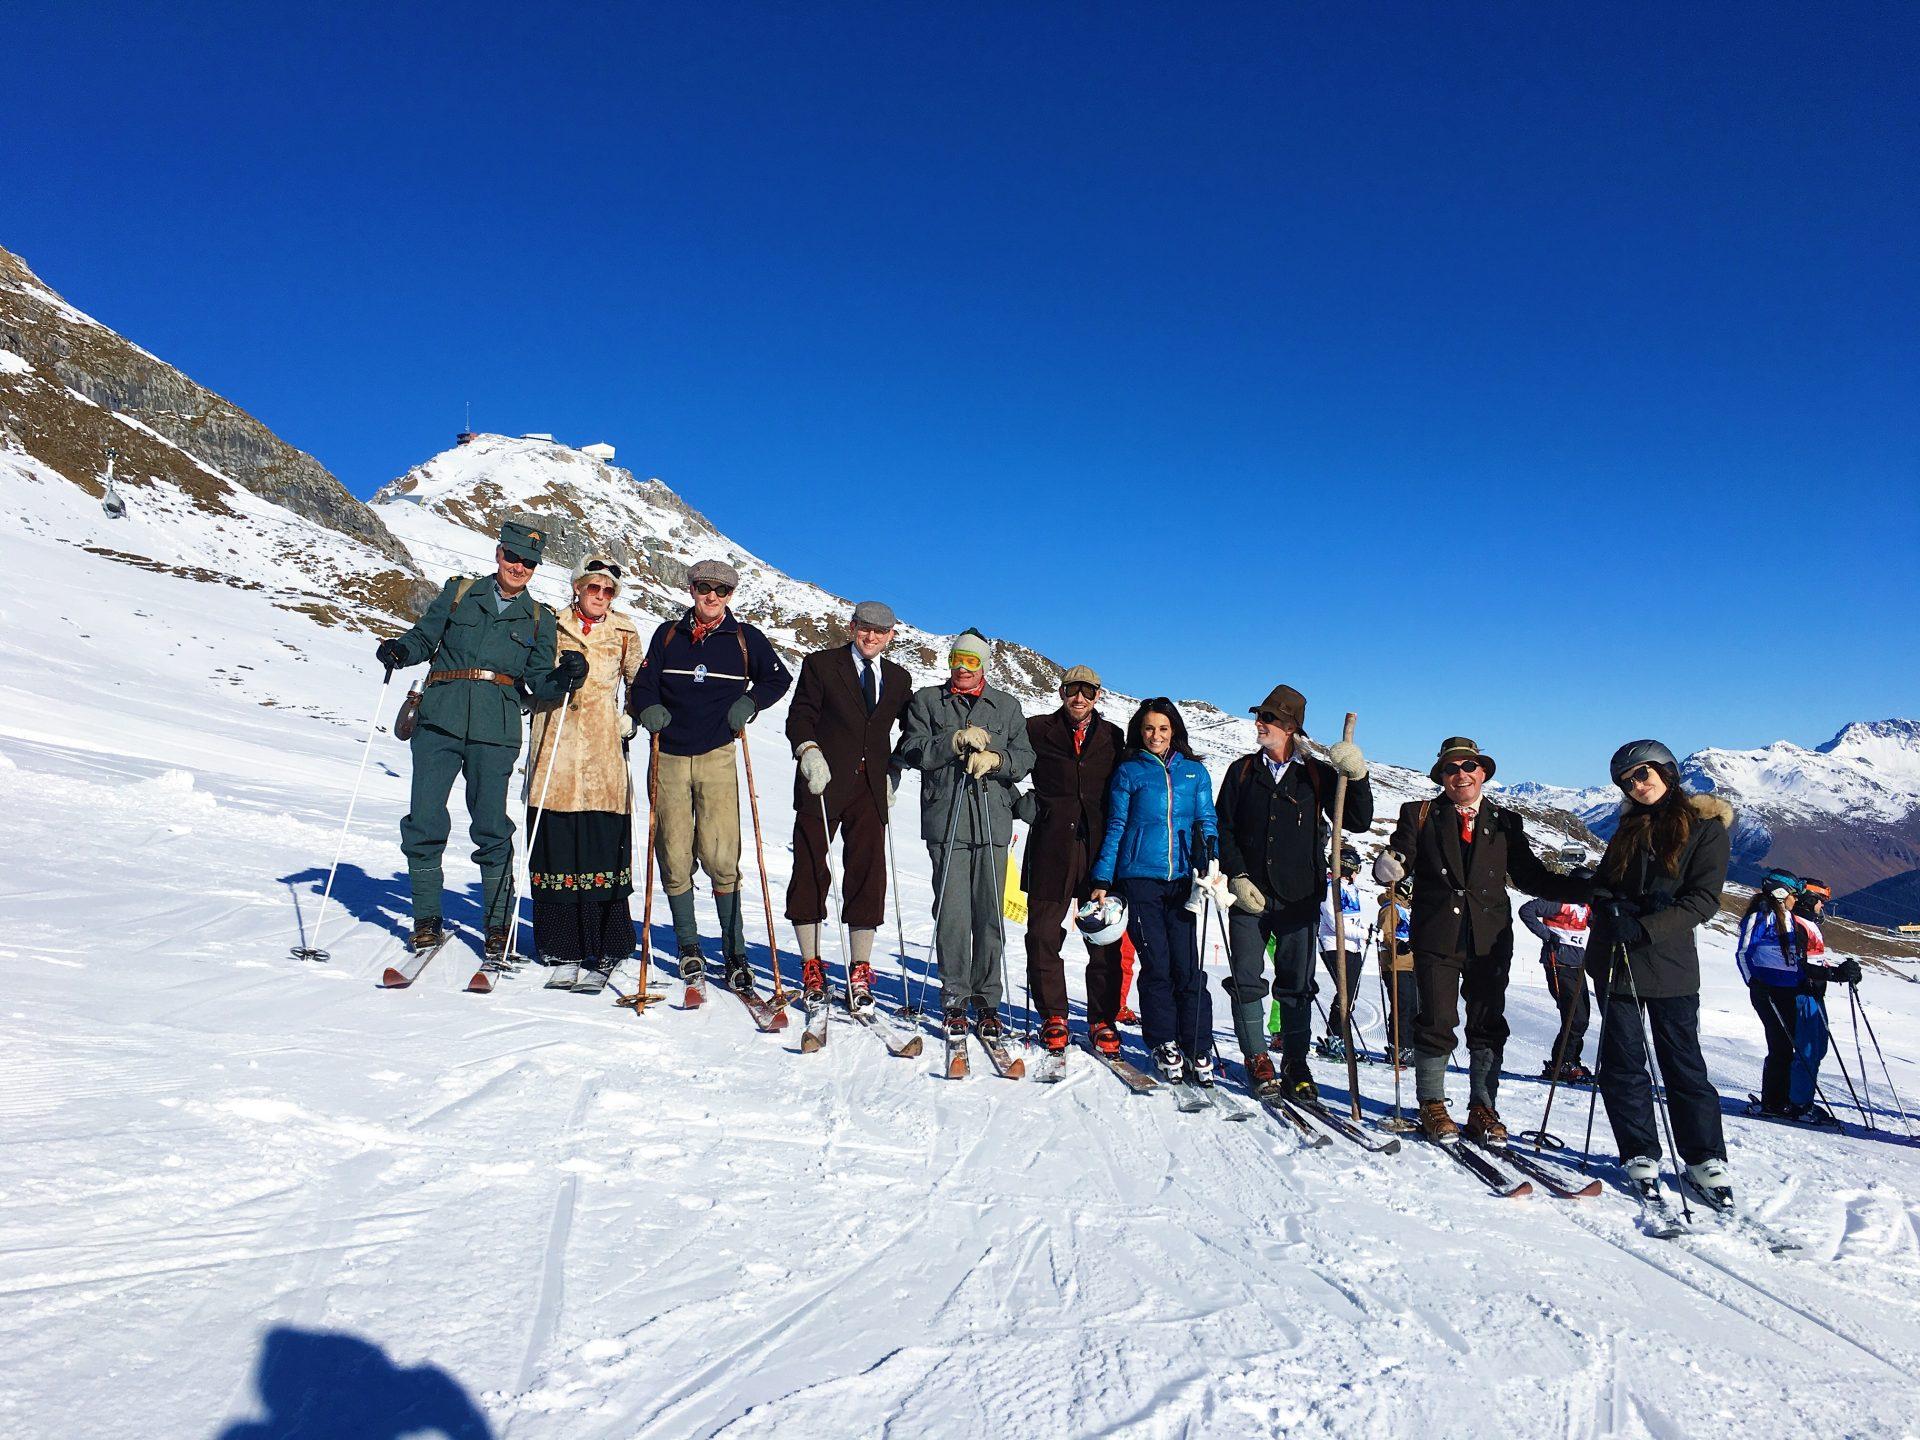 Skiing with Tschuggen Gran Hotel group in Arosa